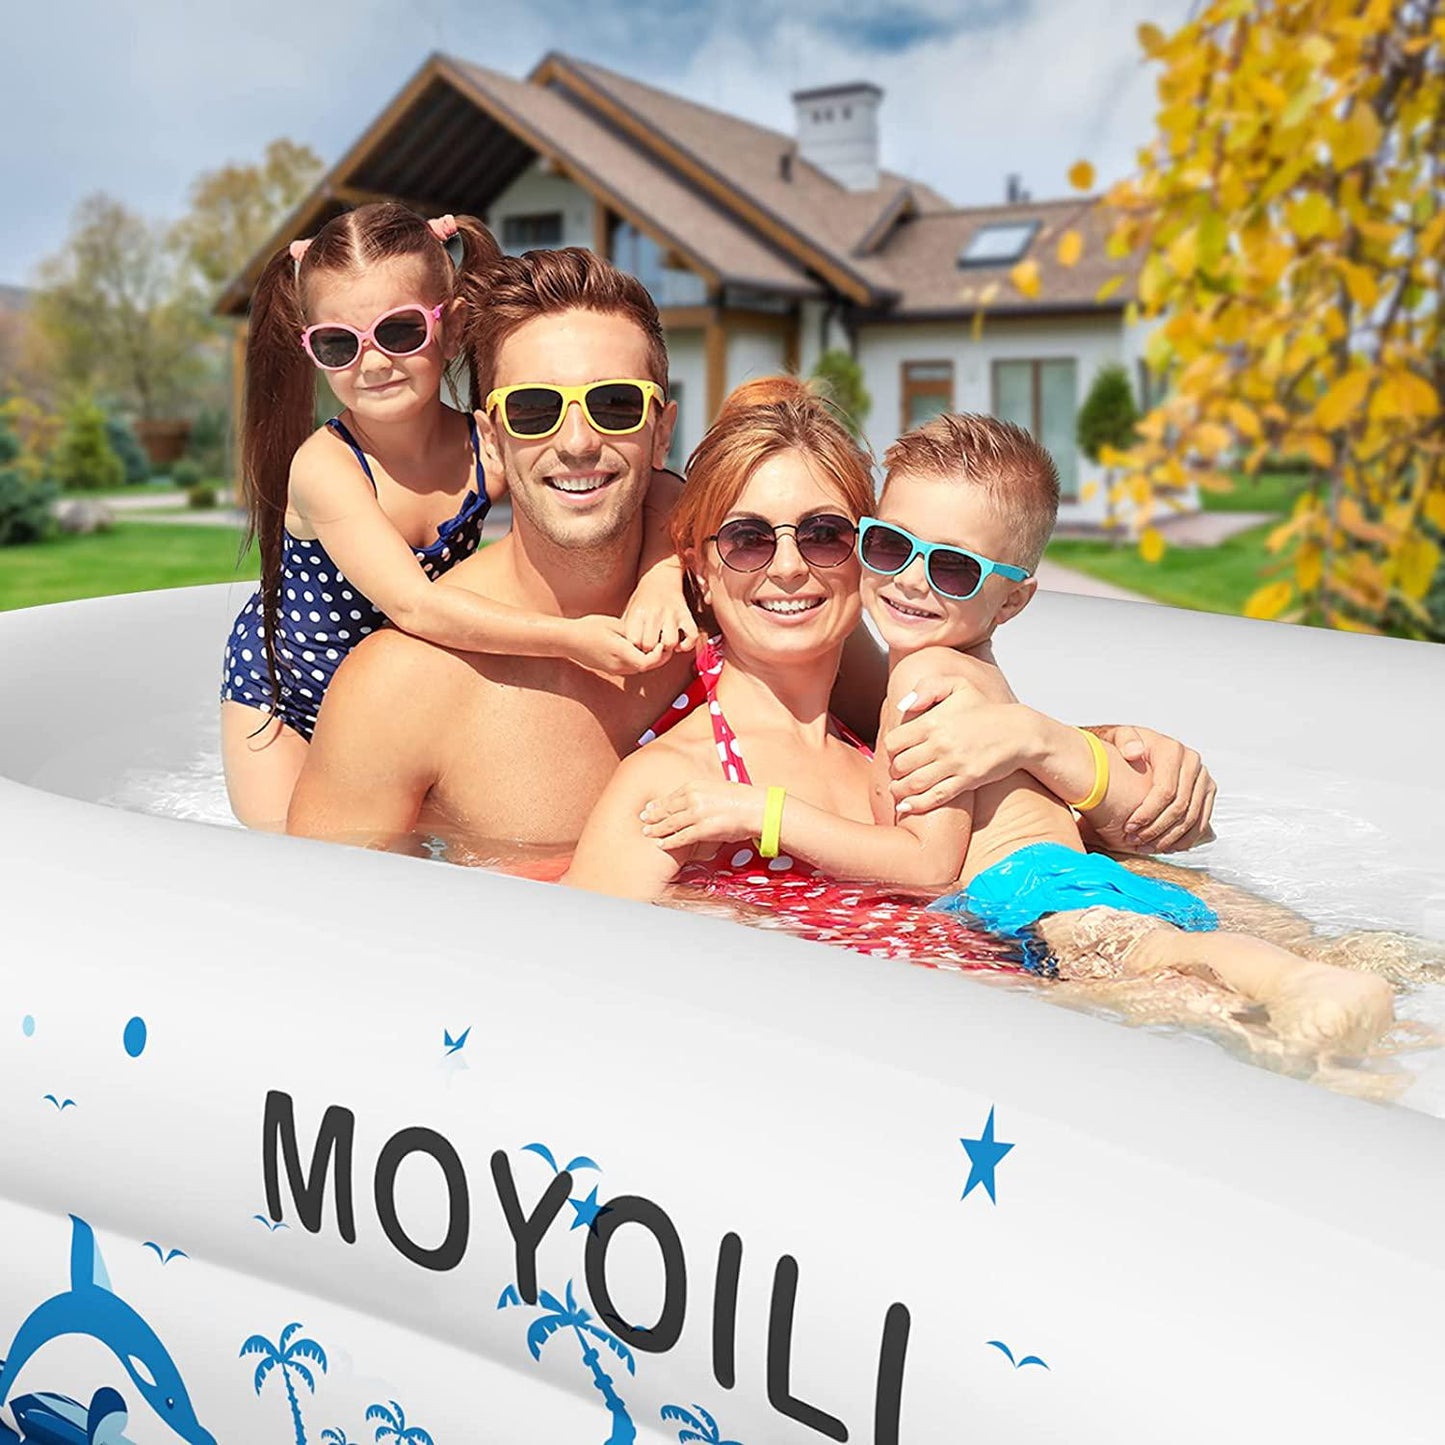 Minosoo Inflatable Pool, 130 x 72 x 22 Inflatable Pool for Adults and Kids with Seat, Drink Holder Full Sized Family Blow Up Swimming Kiddie Pool